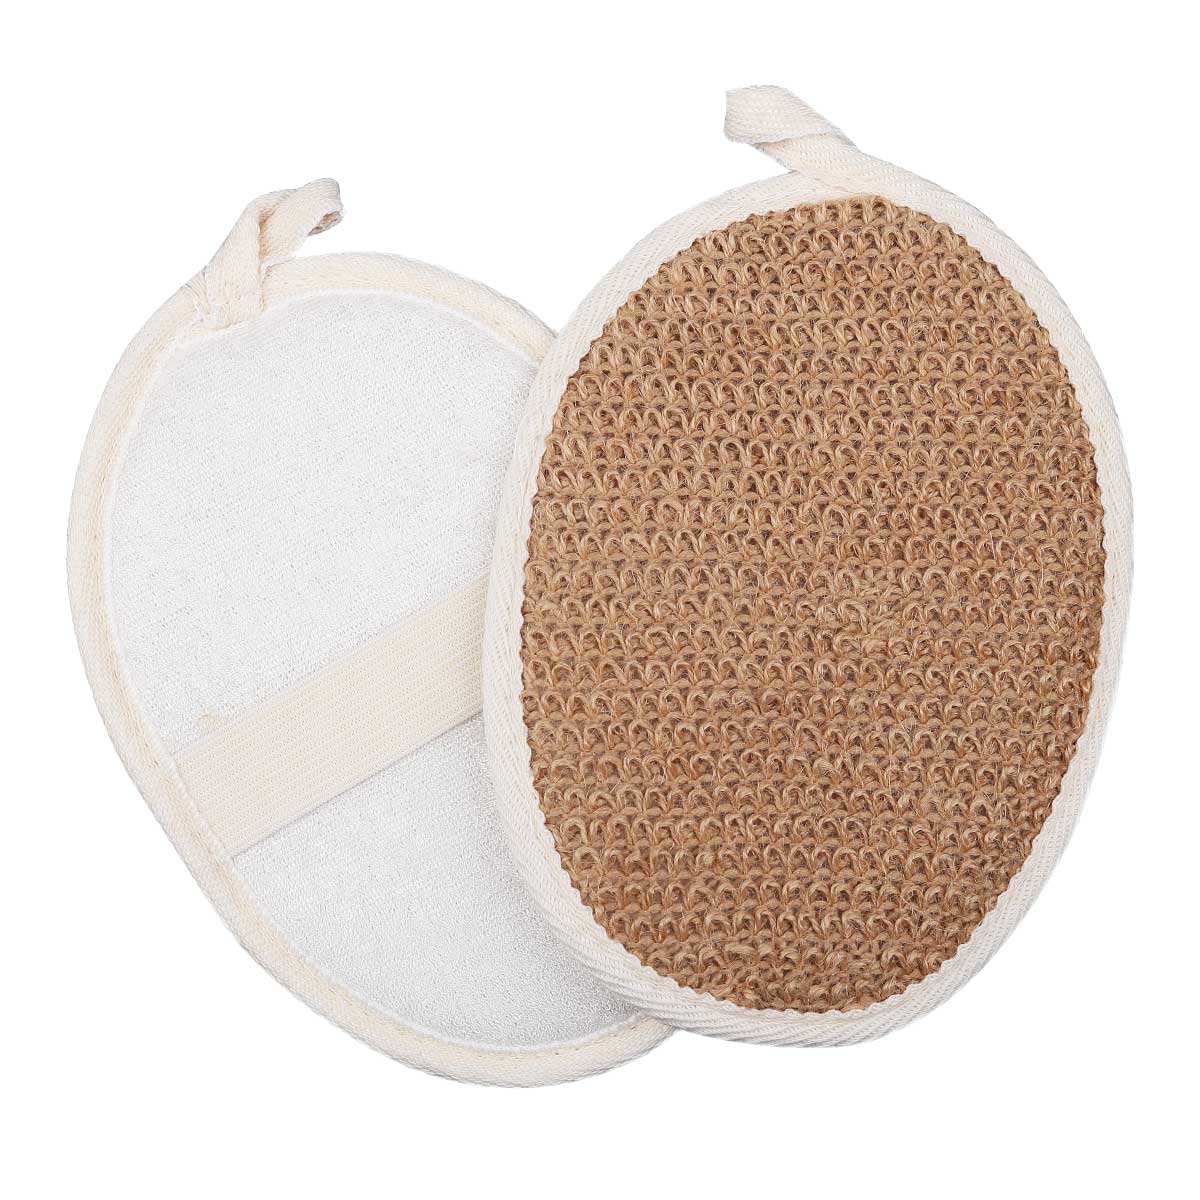 Wholesale 2 in 1 Jute and Bamboo Scrub 2pc Set